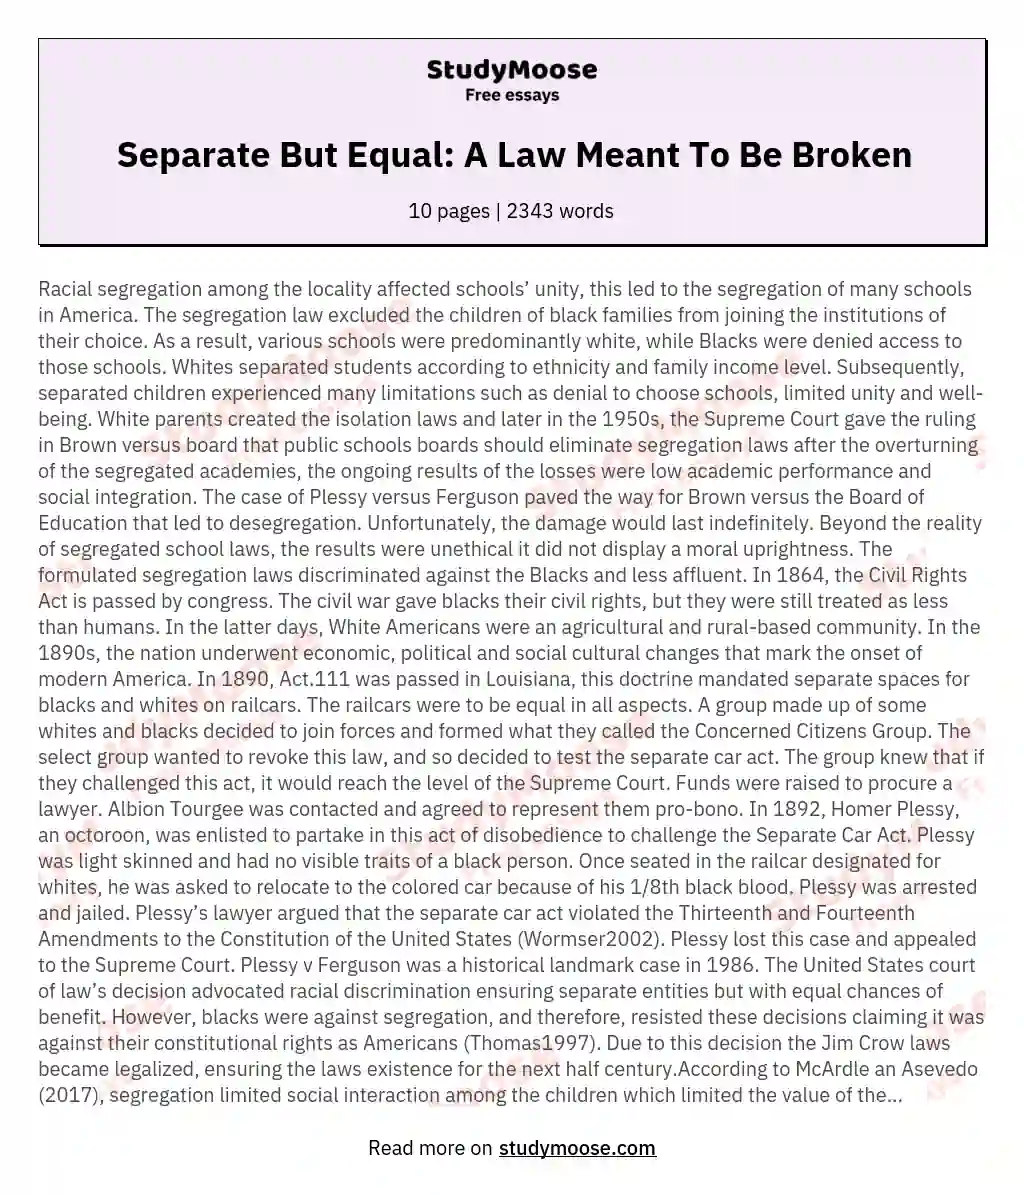 Separate But Equal: A Law Meant To Be Broken